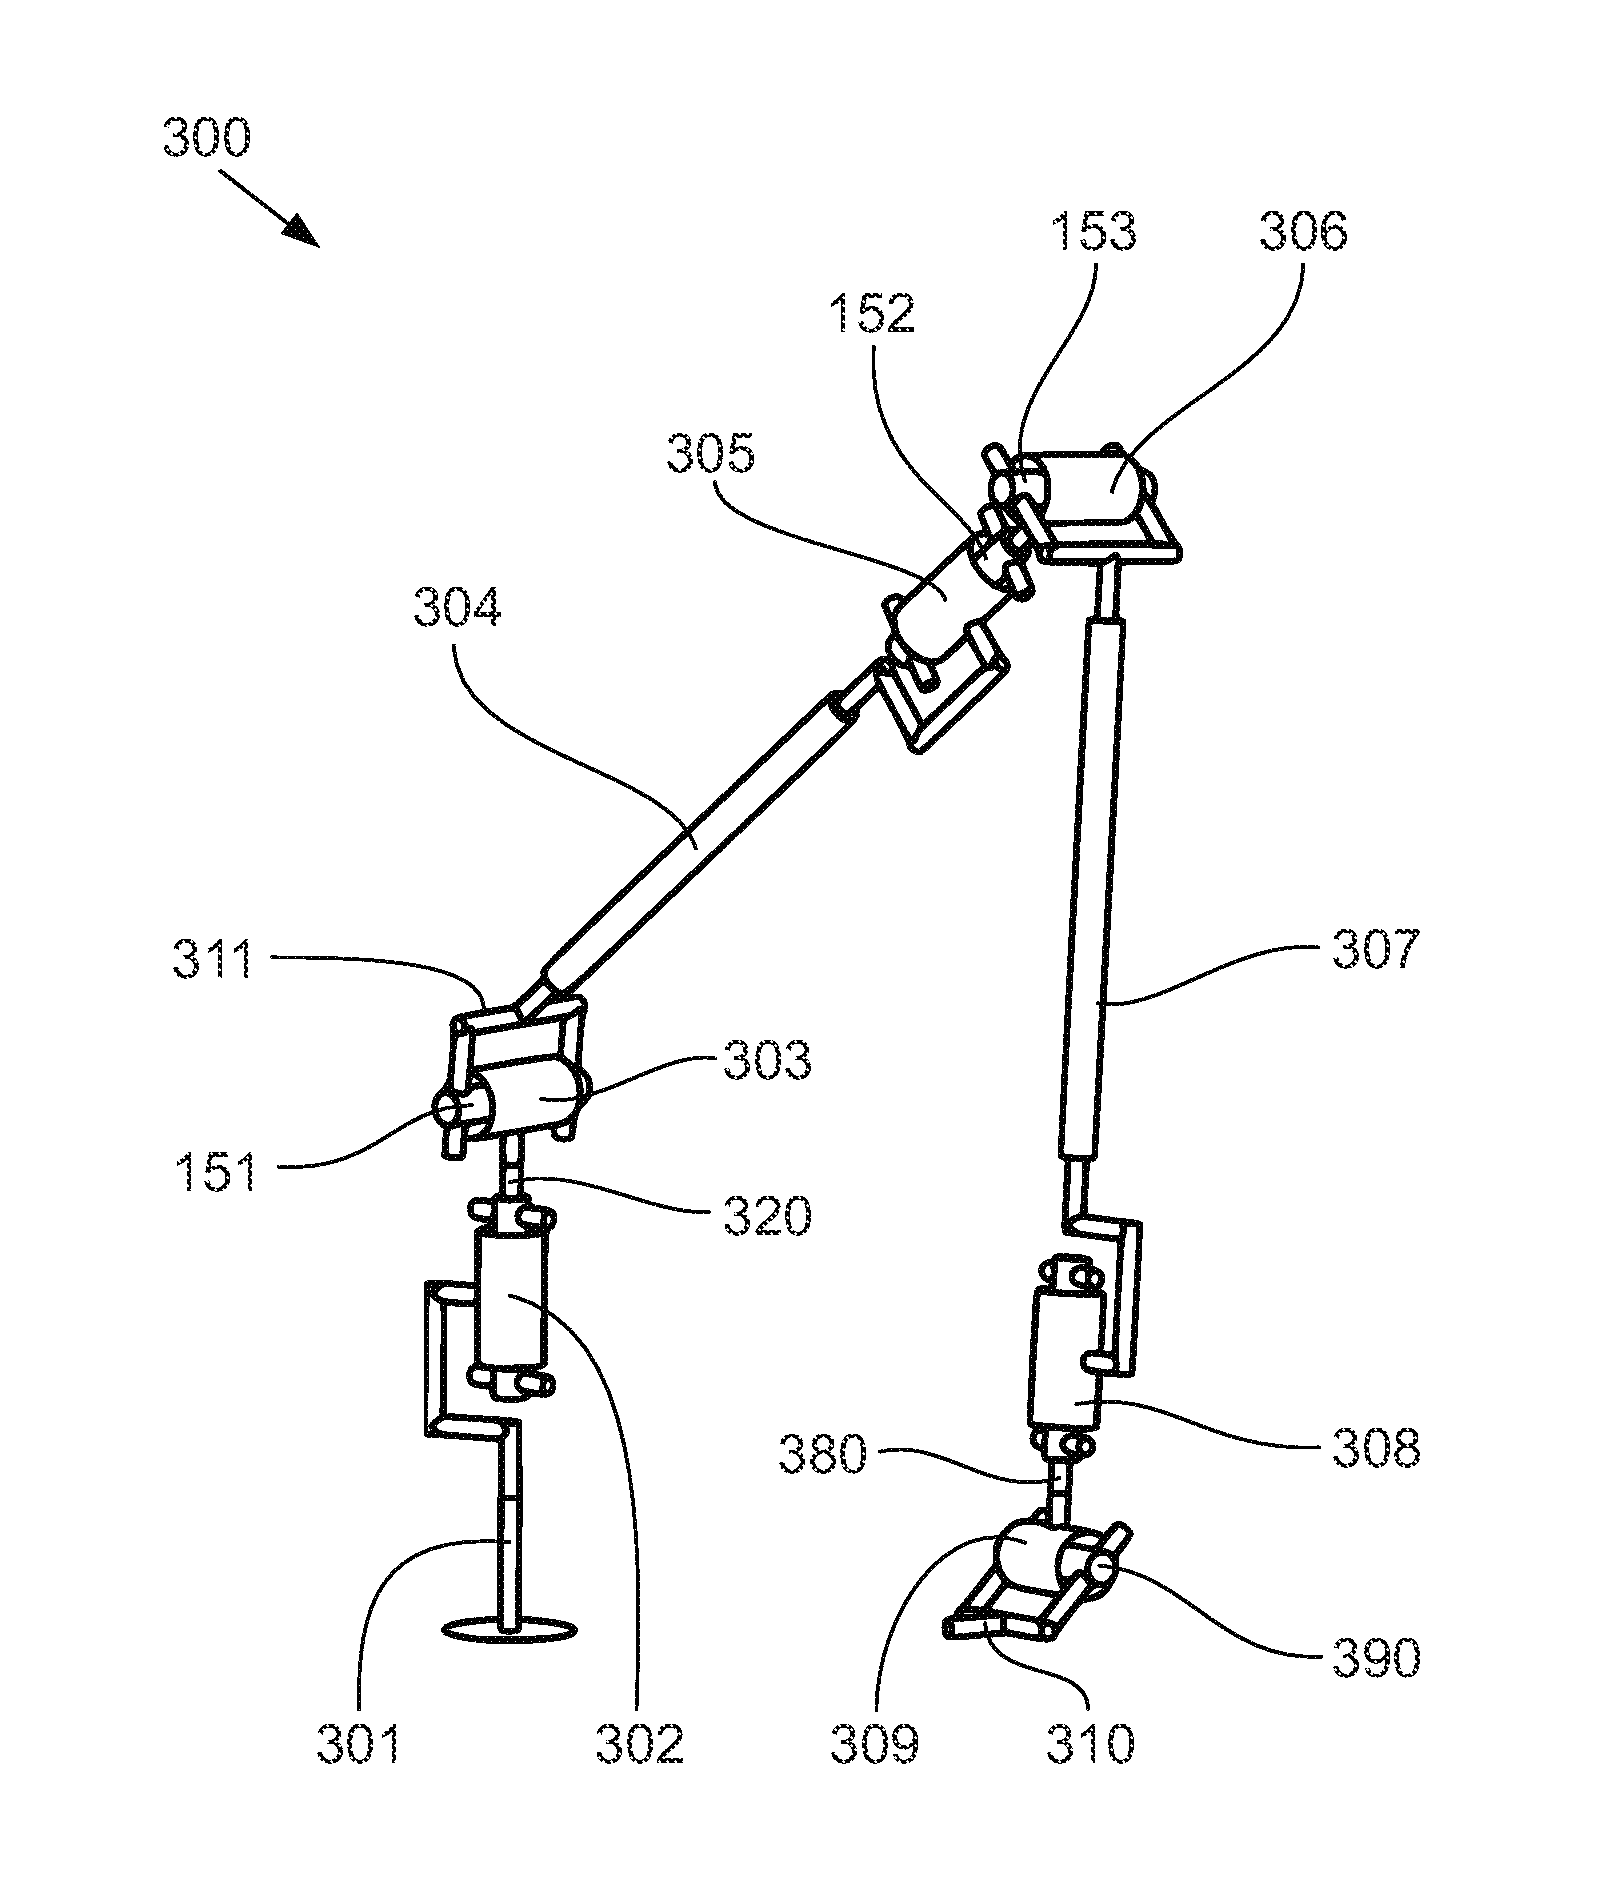 Articulated mechanical arm equipped with a passive device for compensation for gravity